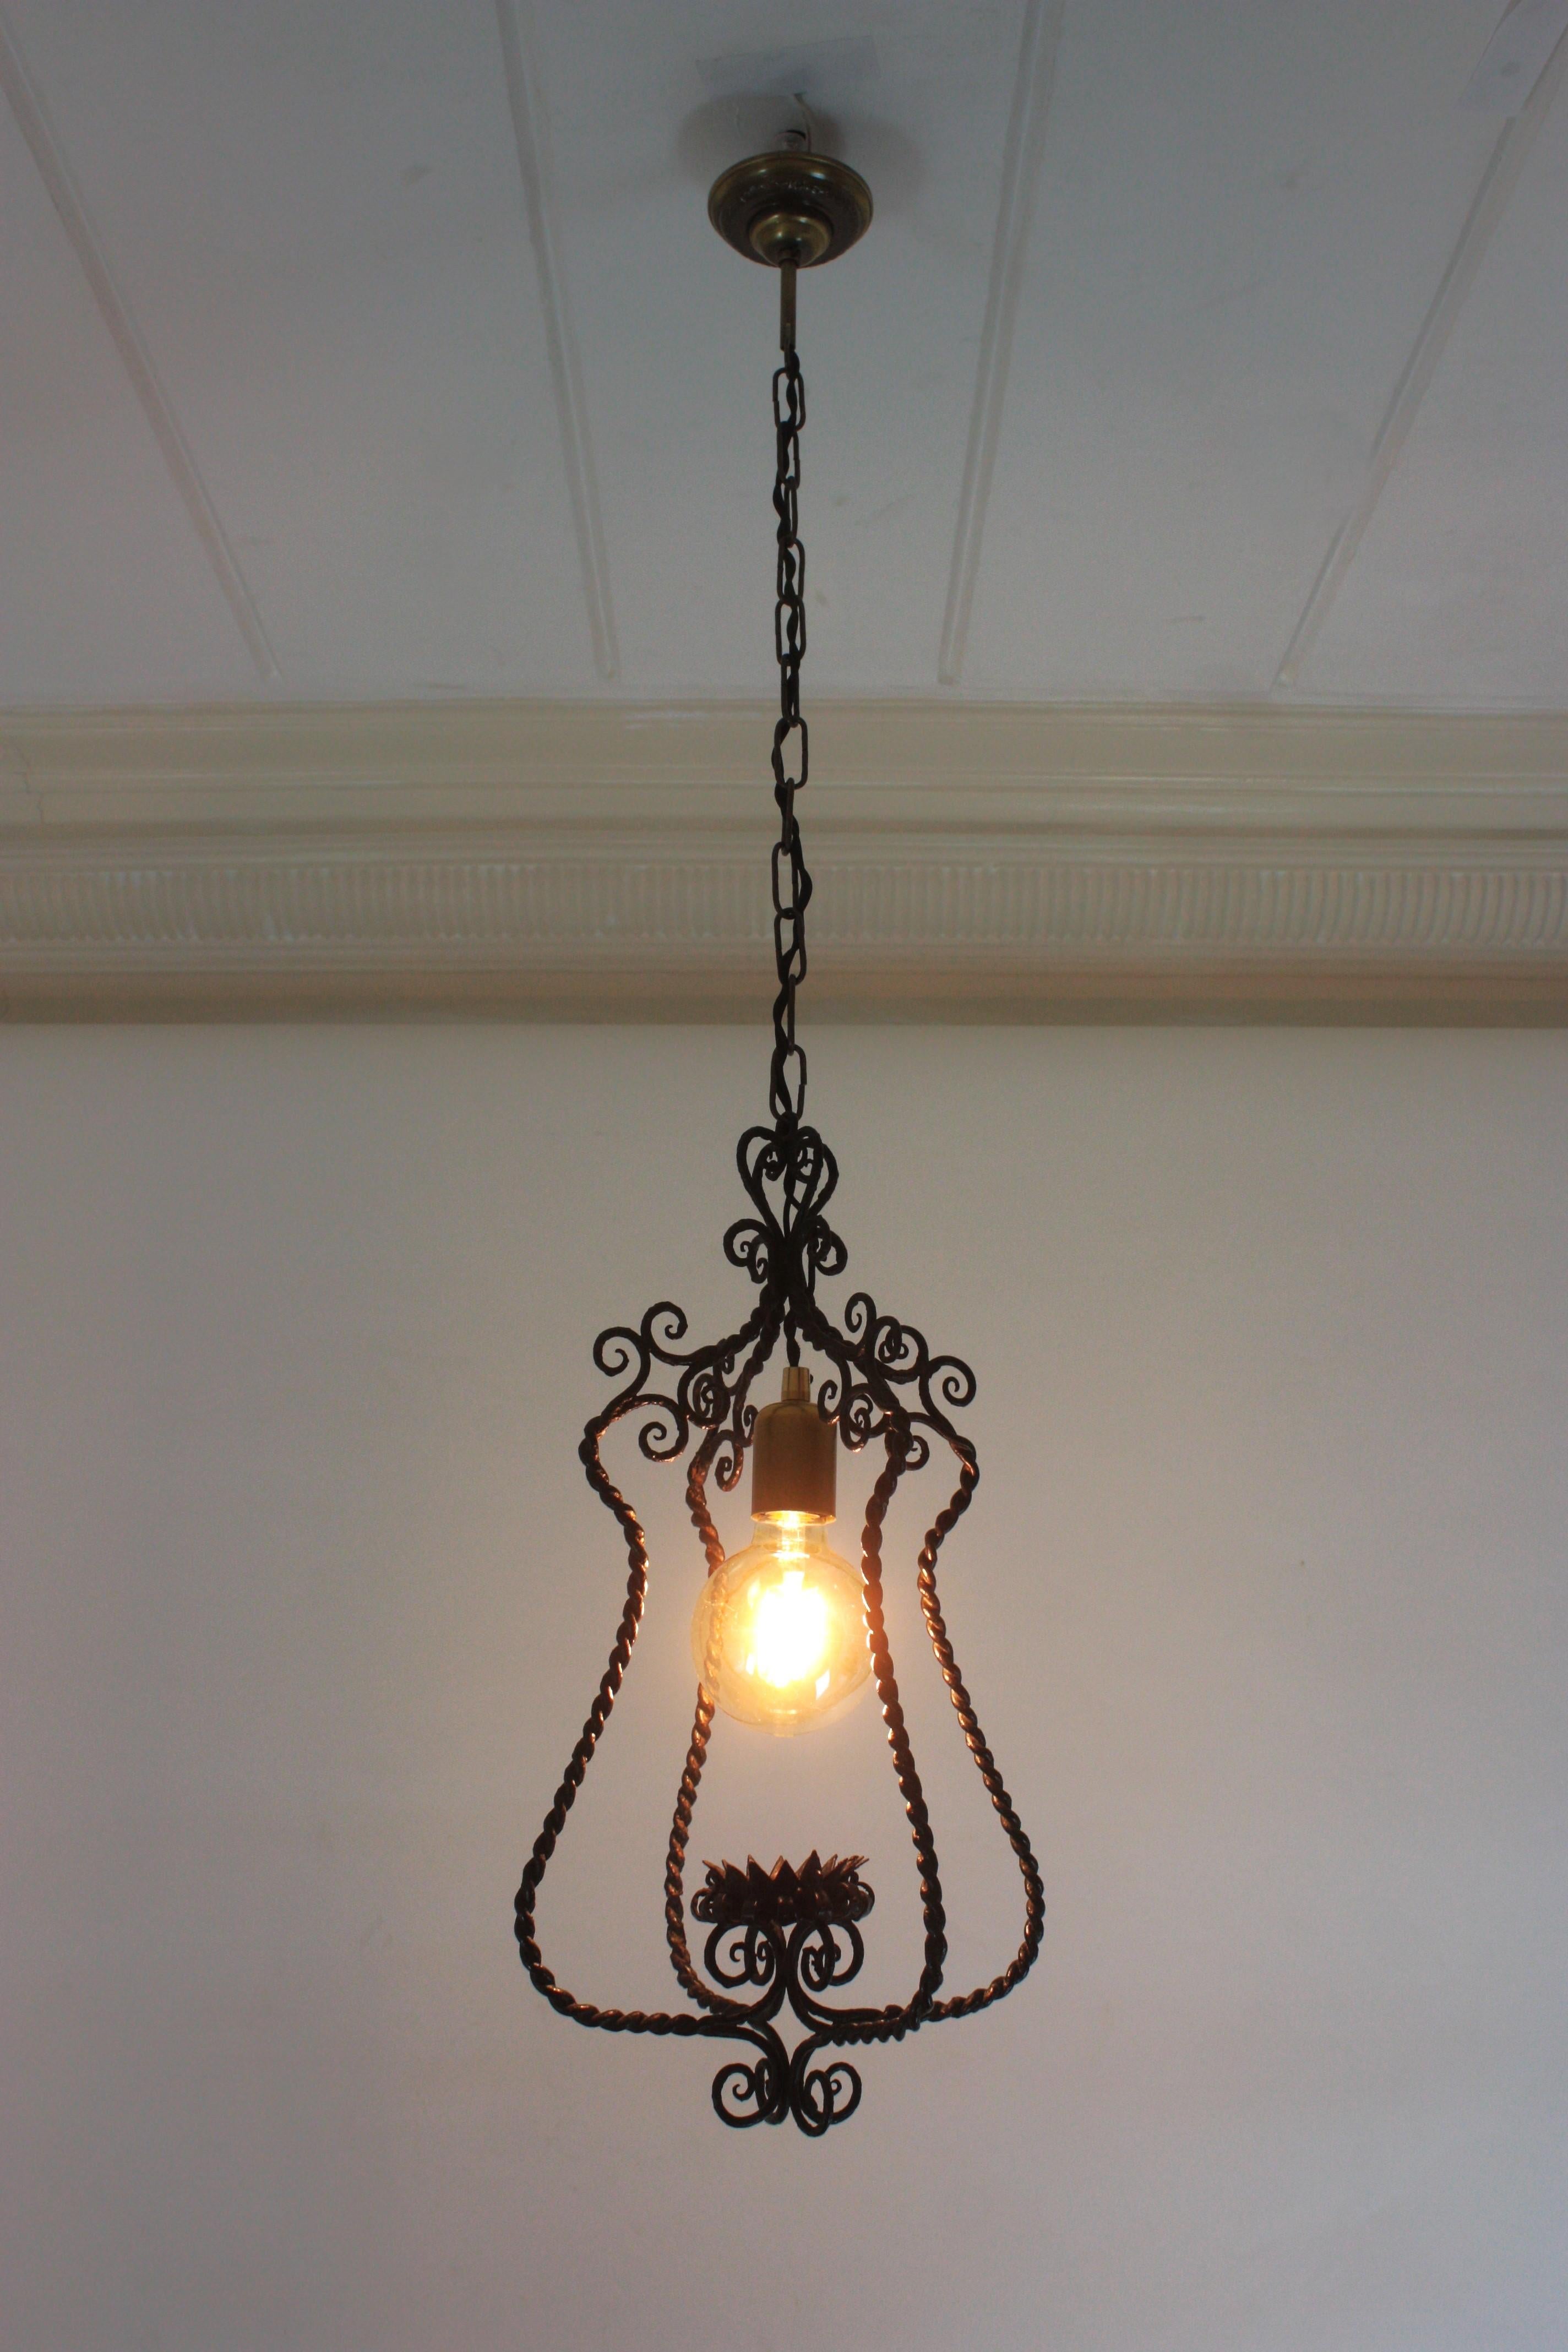 Forged Spanish Lantern Pendant Lamp in Wrought Iron, Scroll Twisting Design, 1940s For Sale